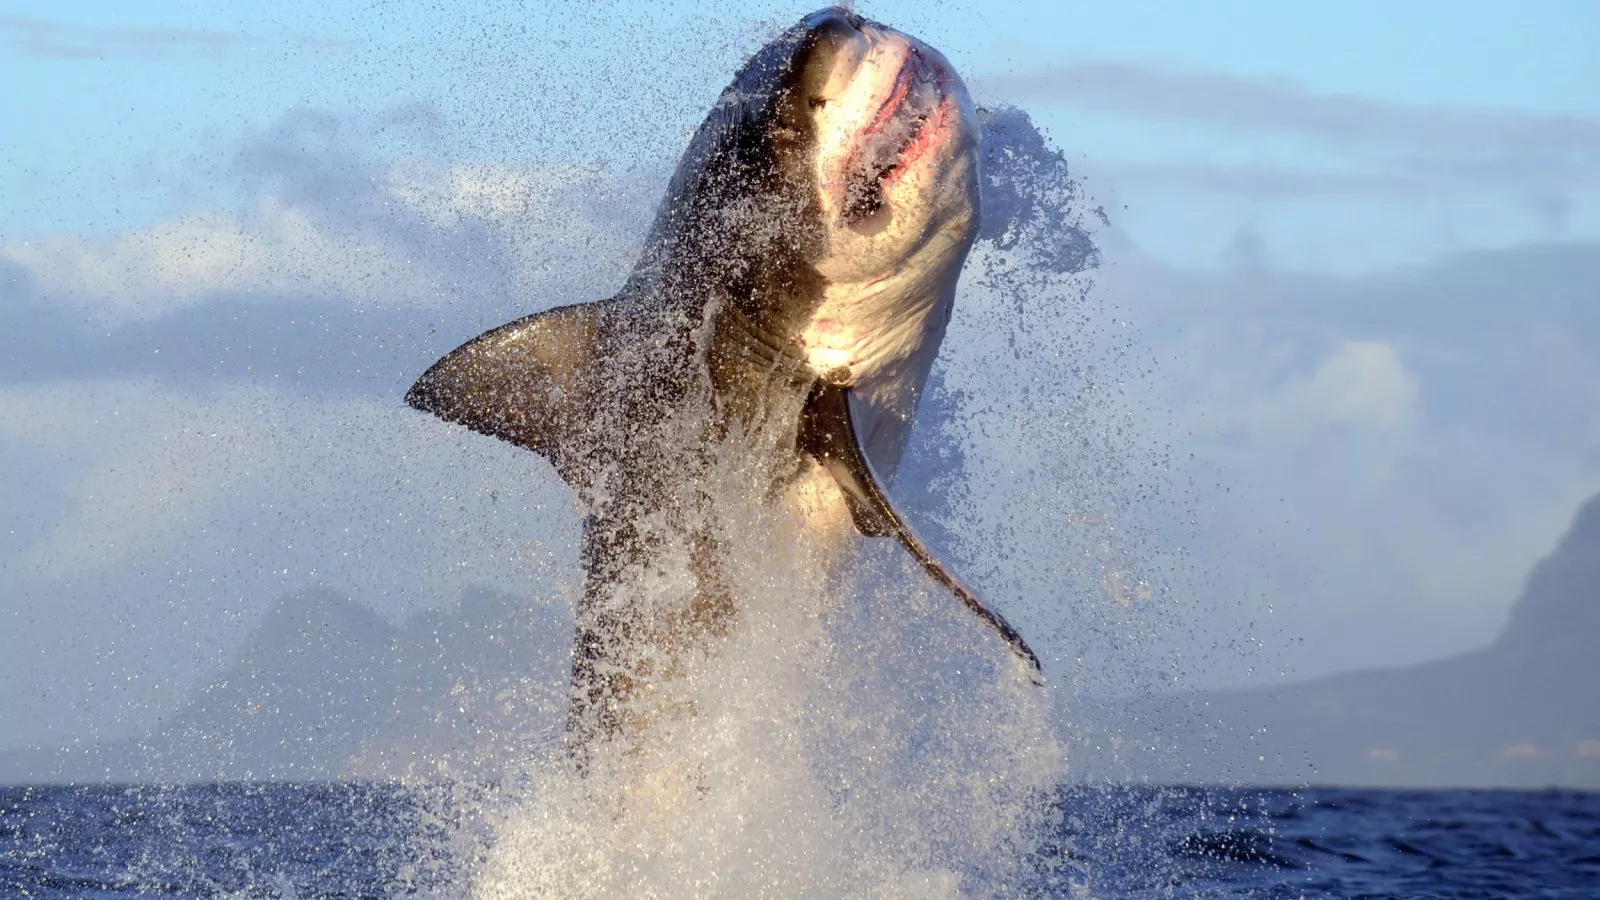 For Richmond man, great white shark is catch of a lifetime